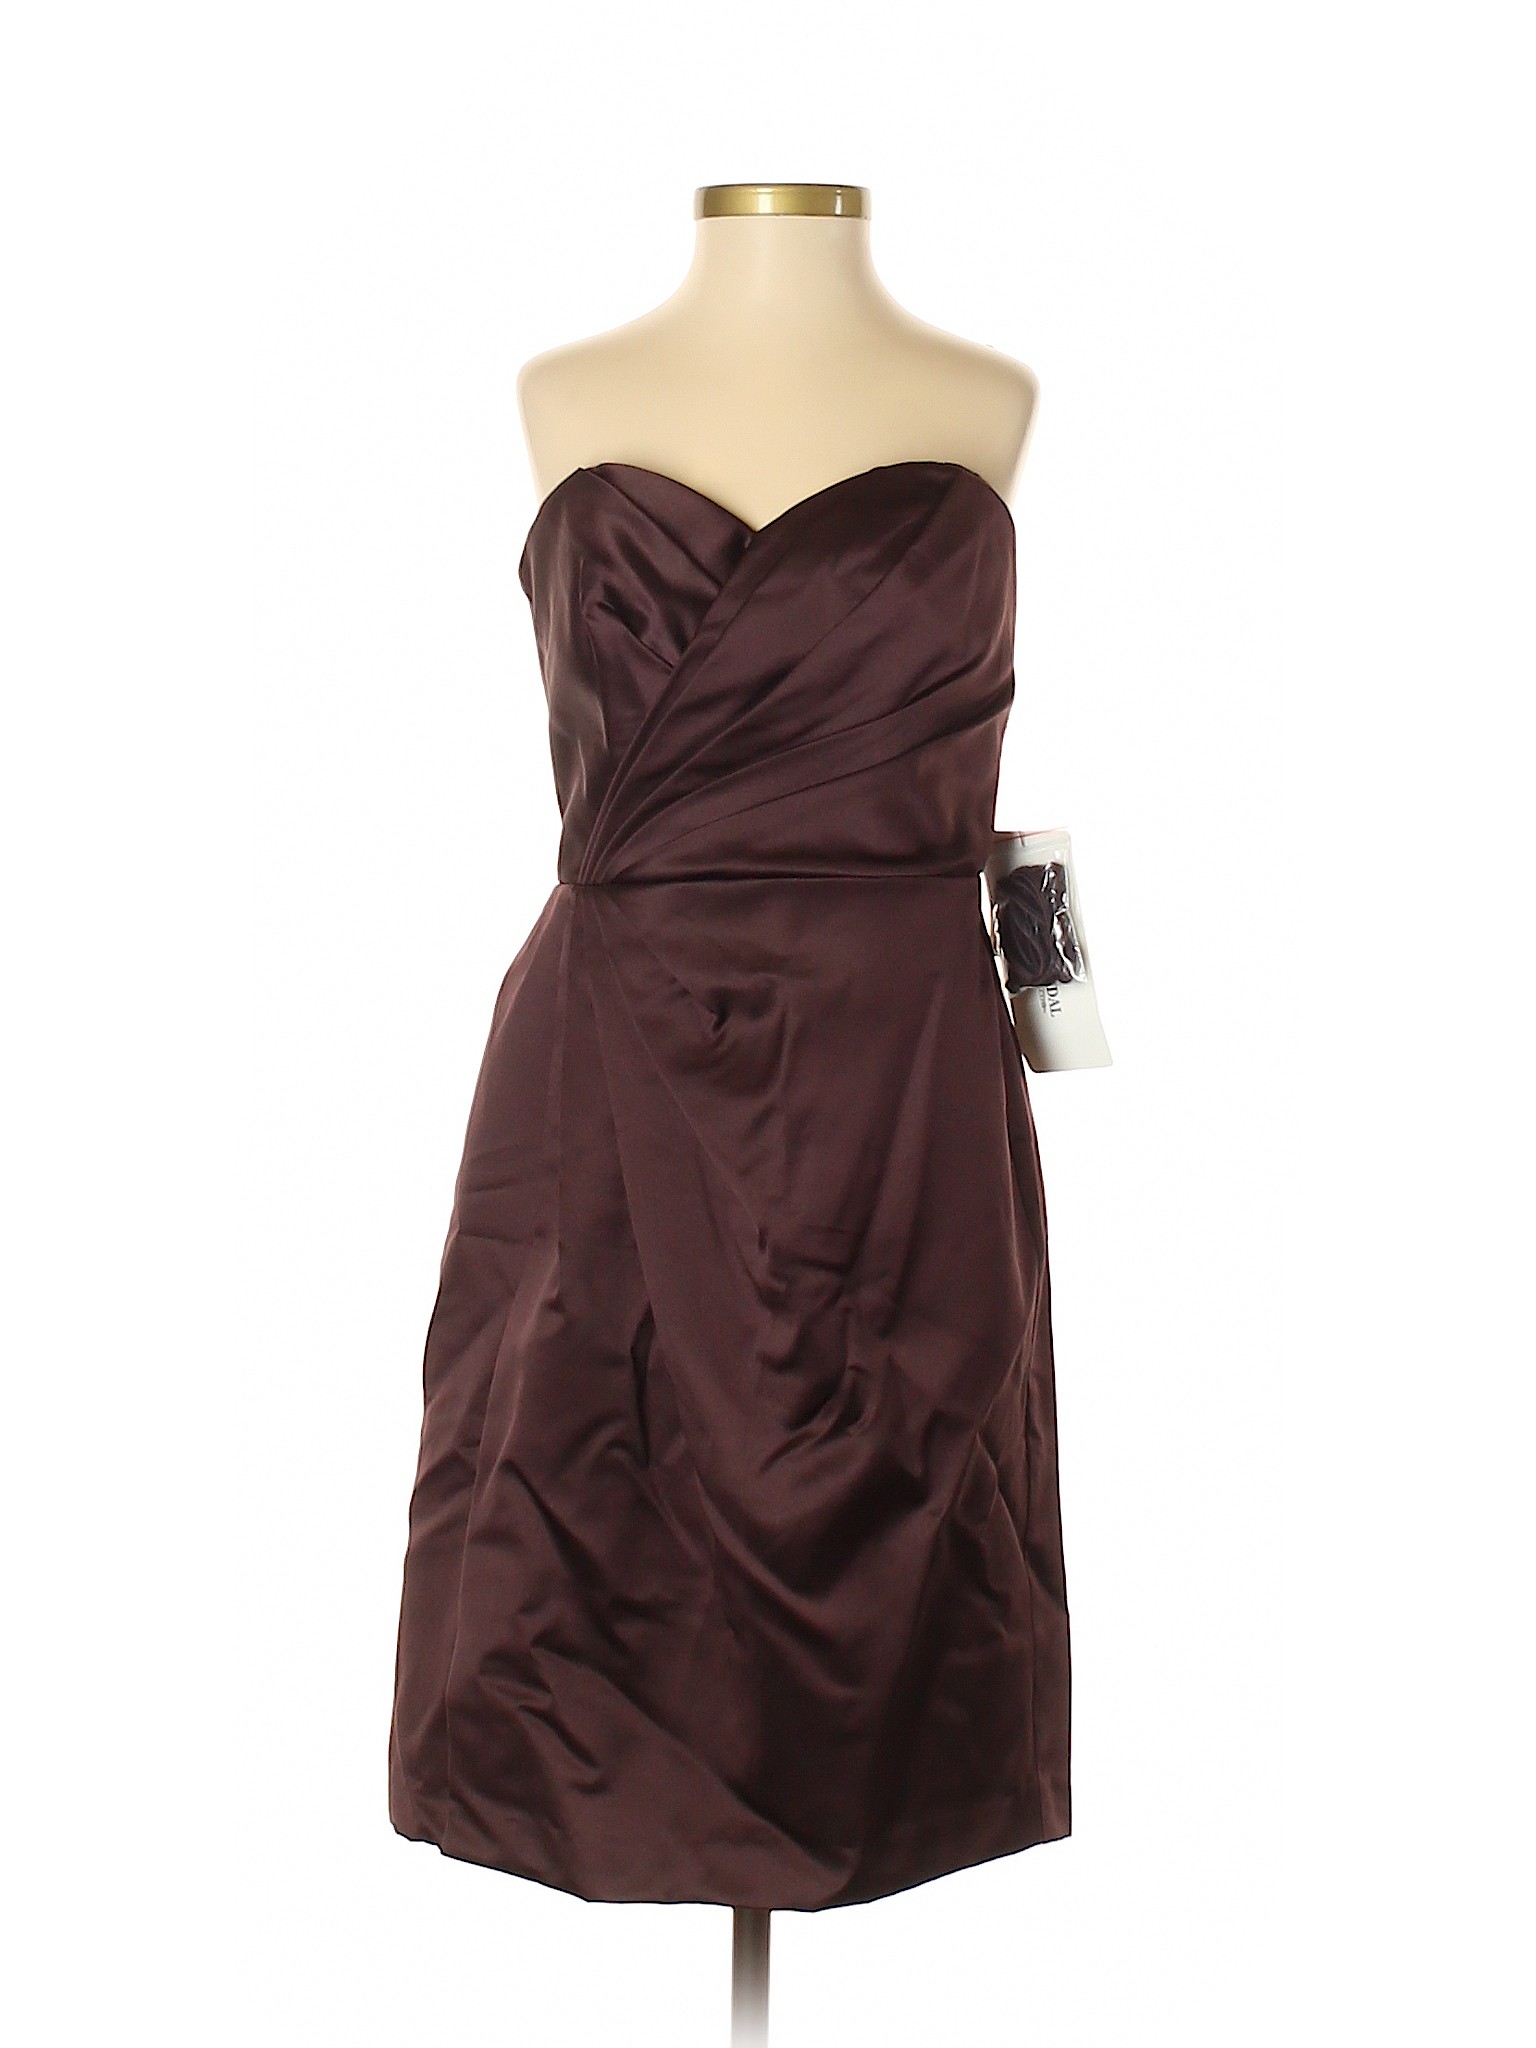 David's Bridal 100% Polyester Solid Brown Cocktail Dress Size 2 - 97% ...